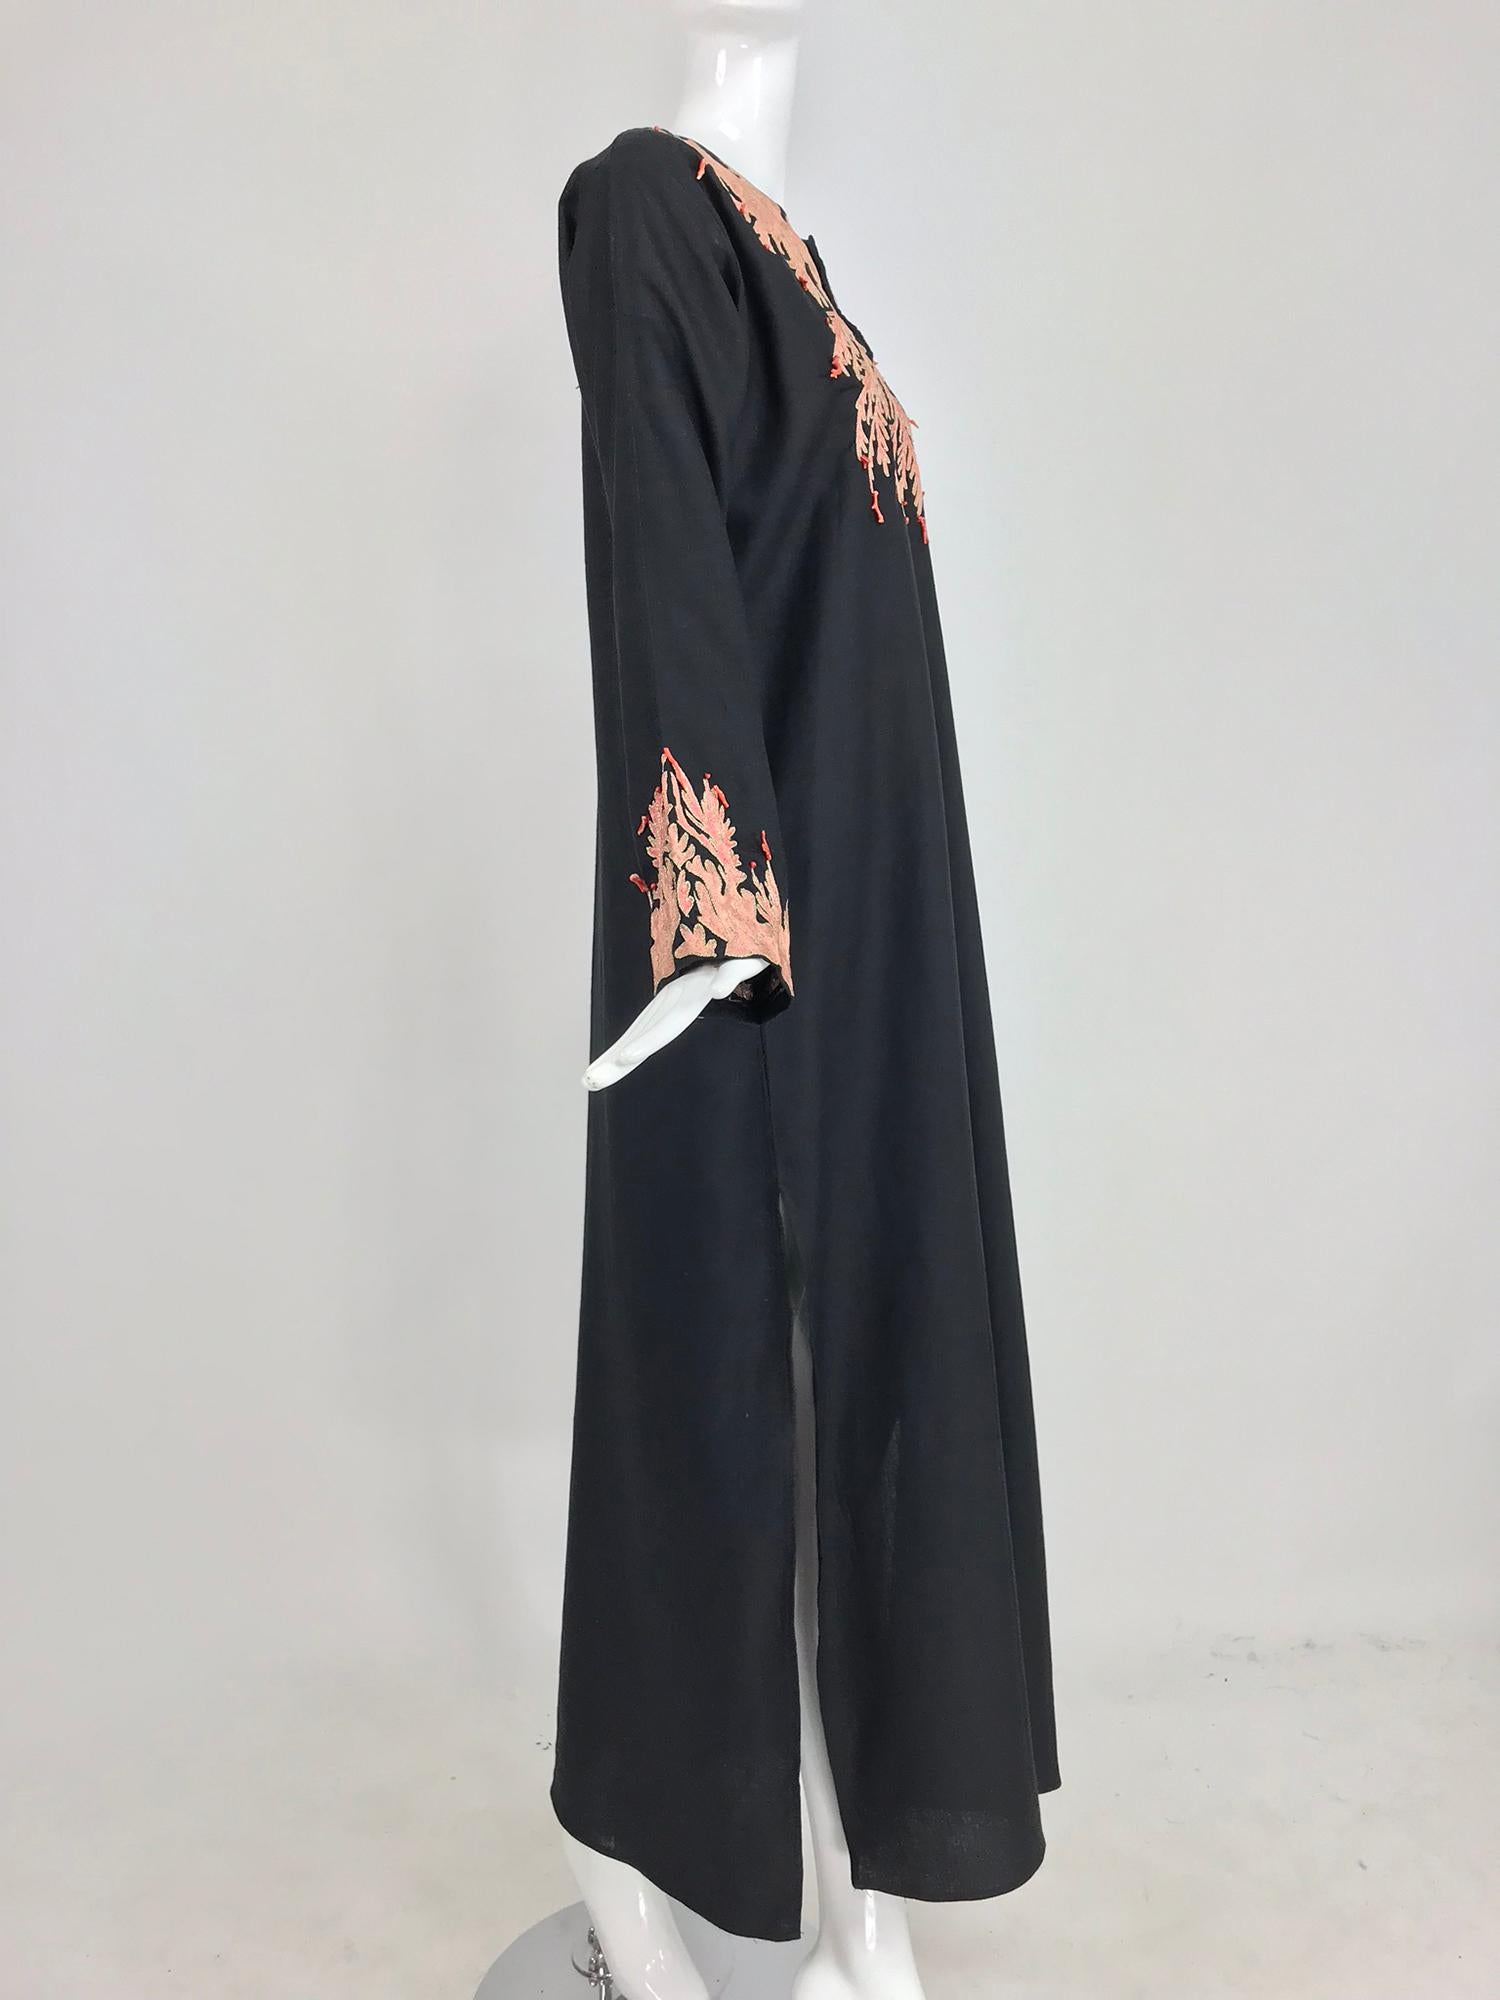 Black Jeannie McQueeny coral embroidered black linen caftan 